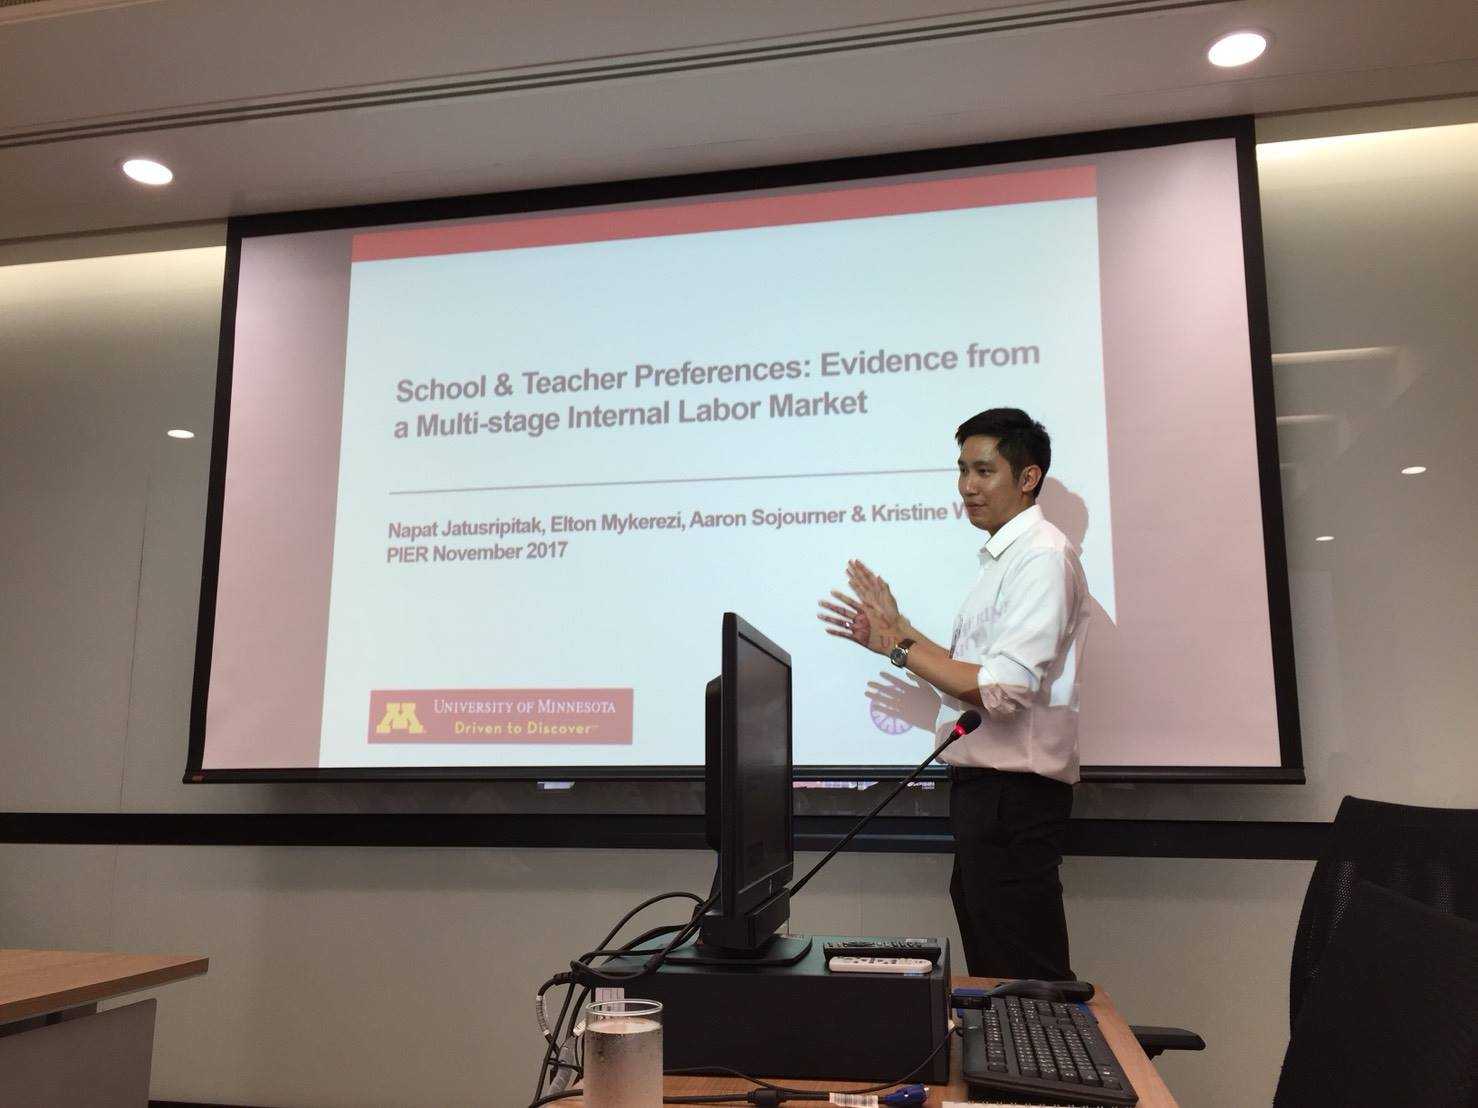 School and Teacher Preferences: Evidence from a Multi-stage Internal Labor Market